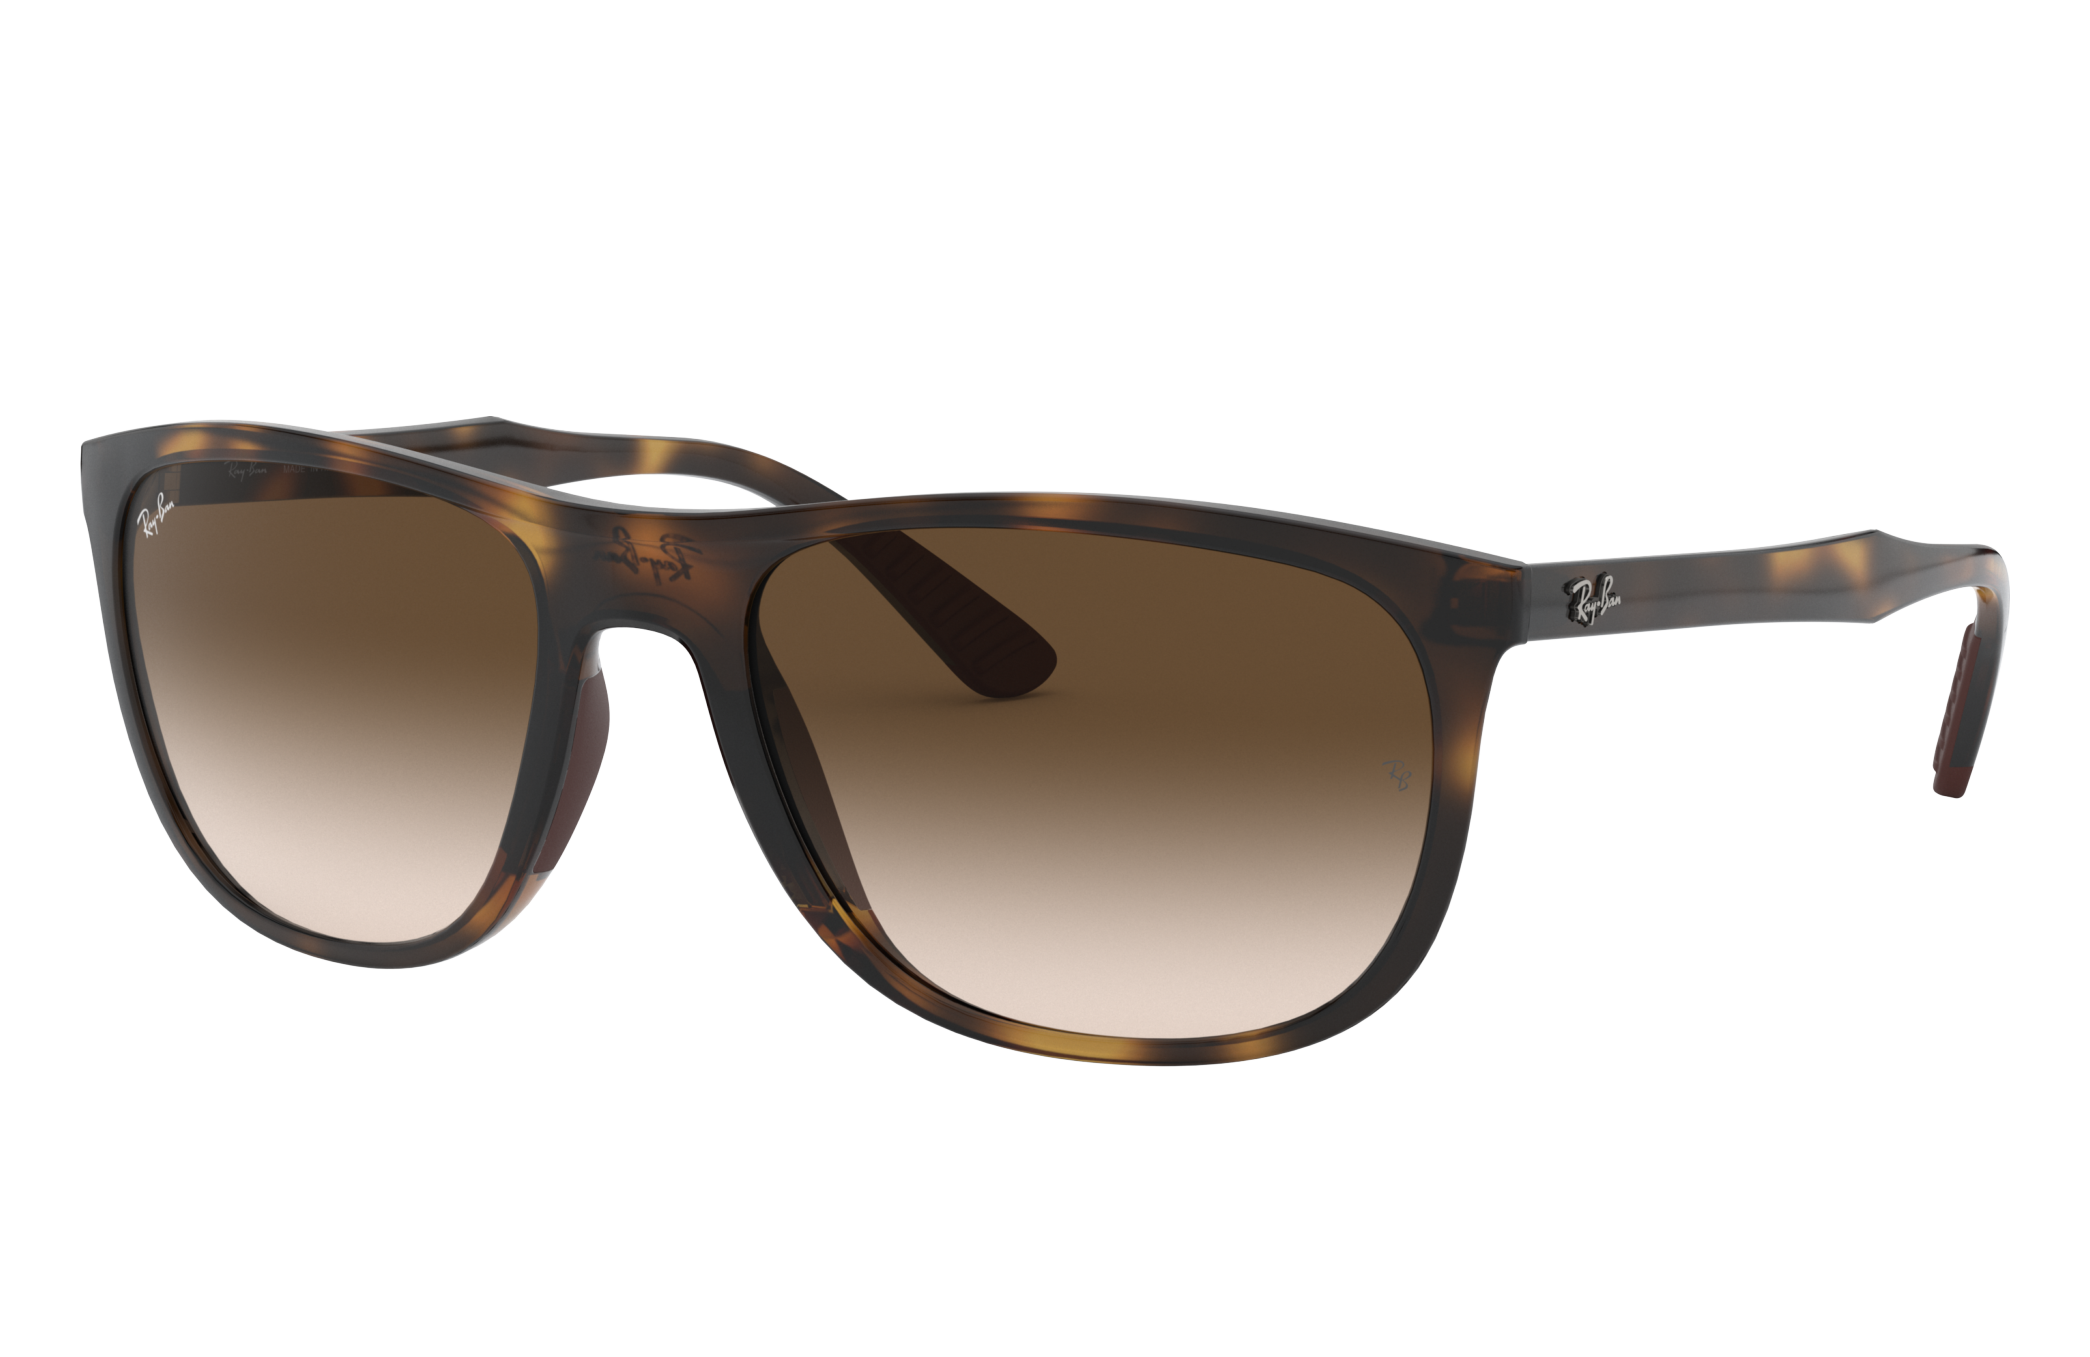 Rb4291 Sunglasses In Tortoise And Brown Ray Ban 